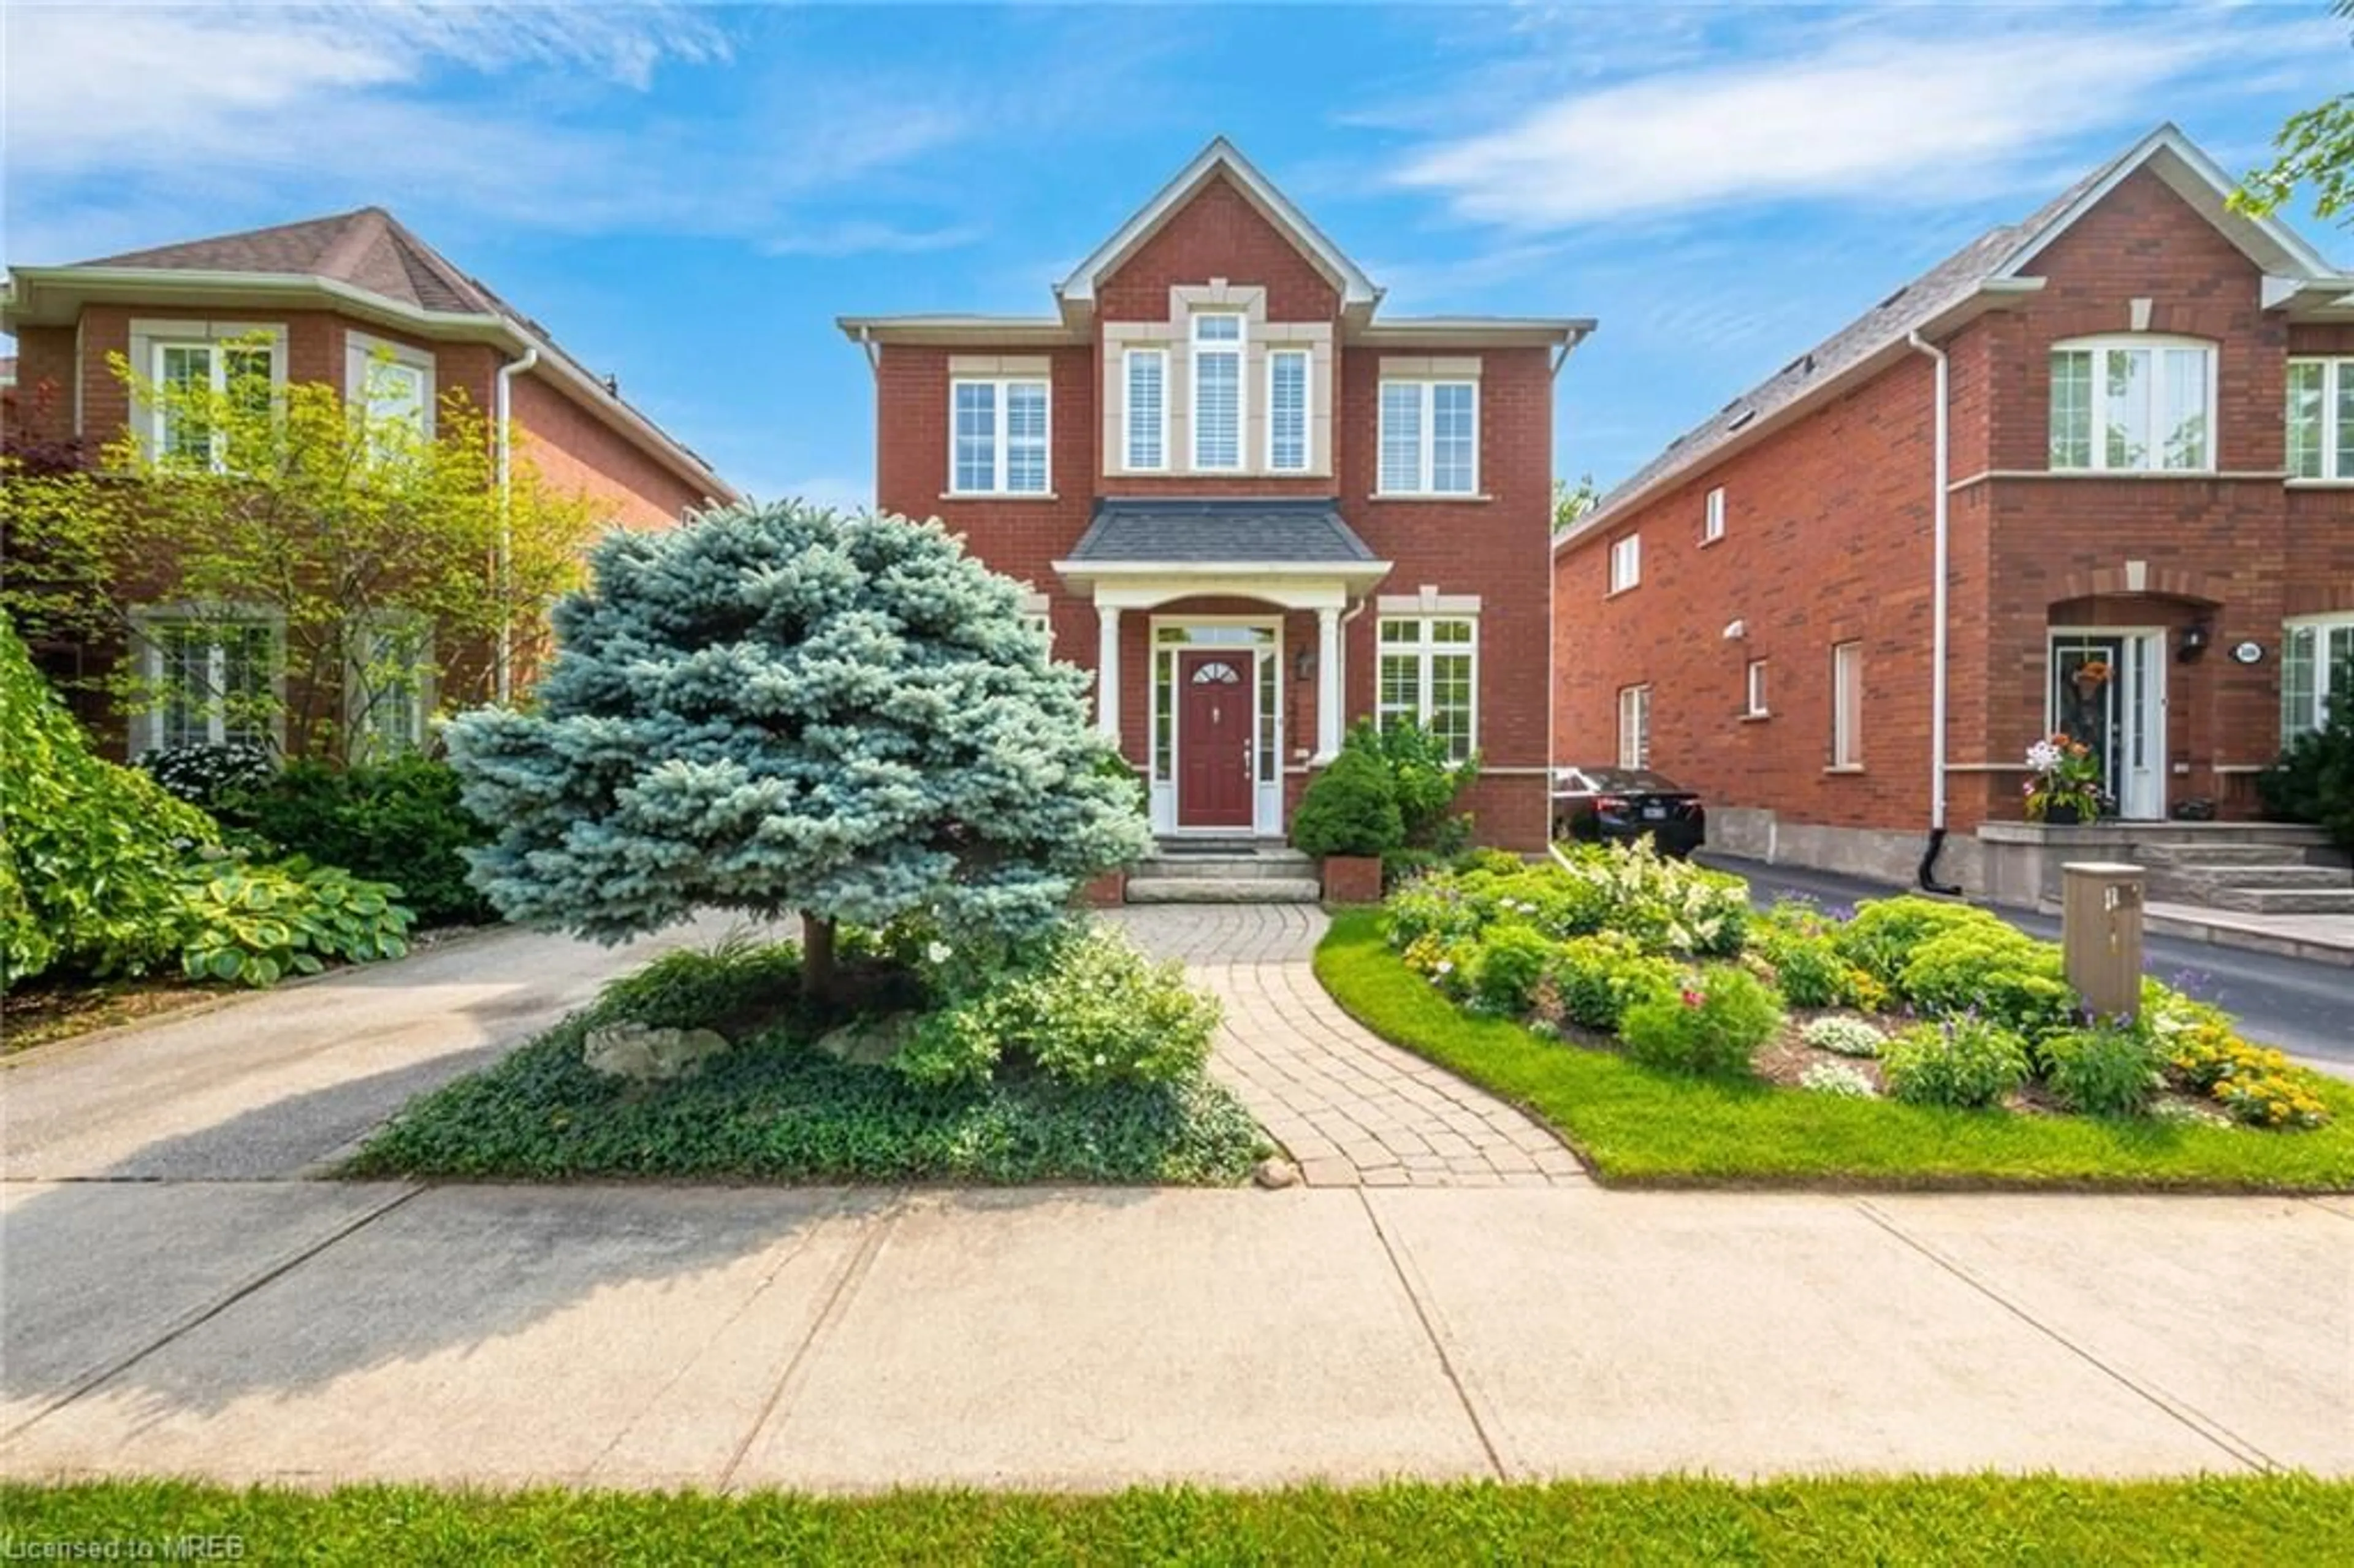 Home with brick exterior material for 2484 Capilano Cres, Oakville Ontario L6H 6L4